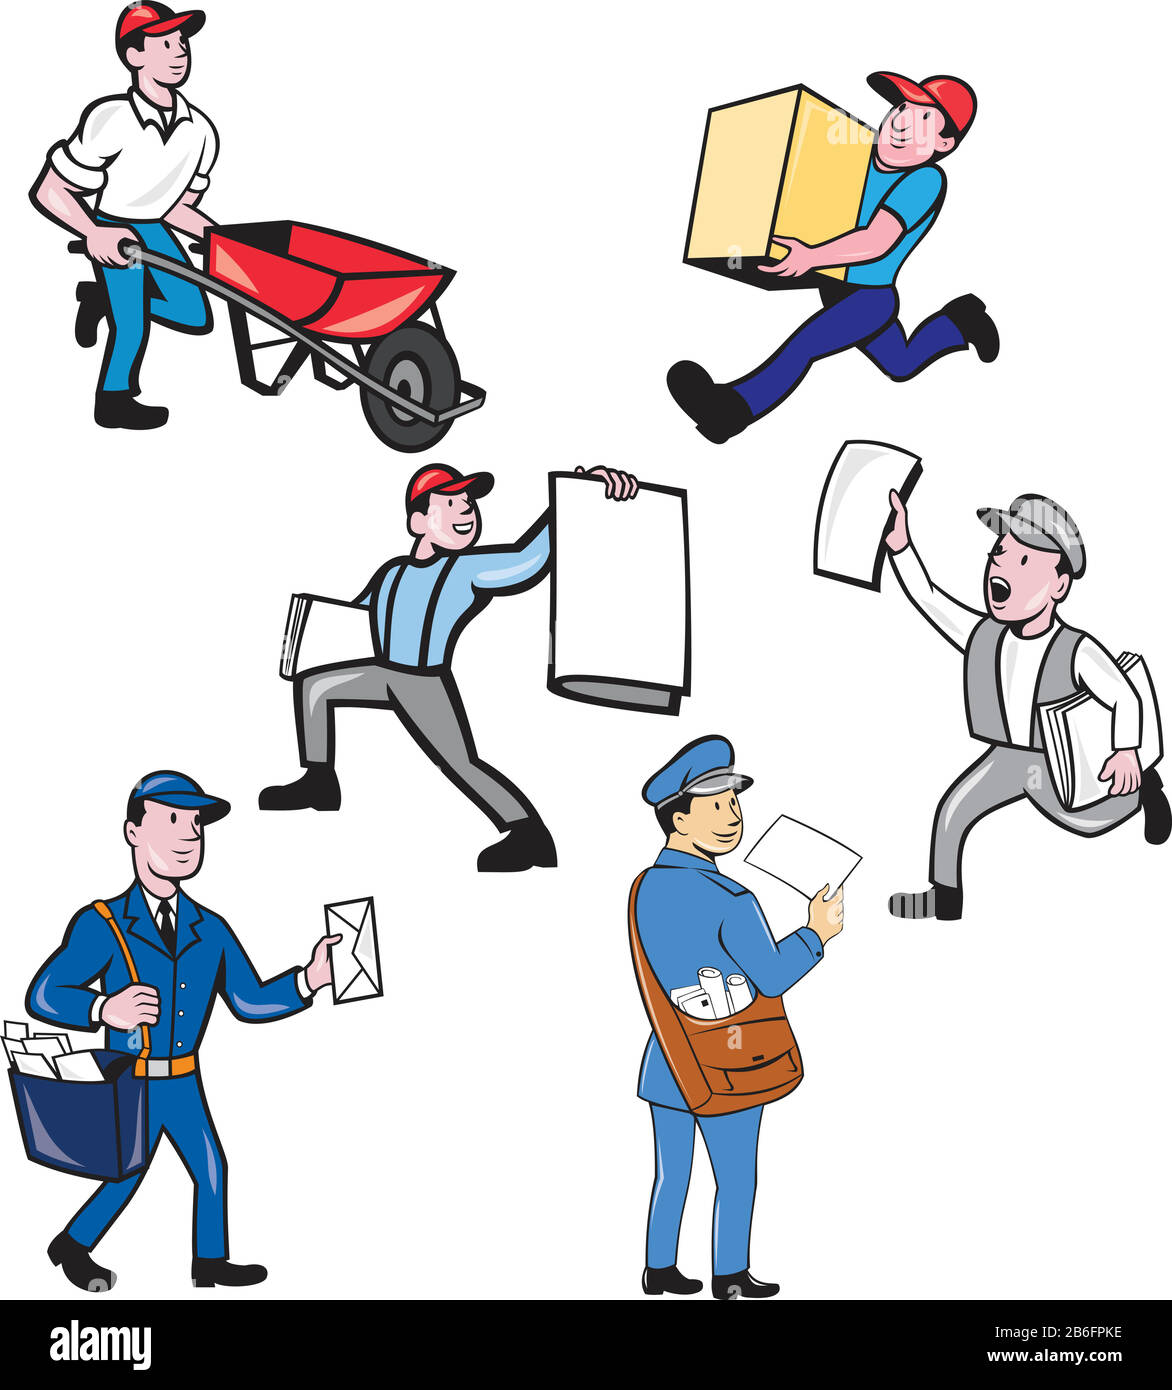 Set or collection of cartoon character mascot style illustration of a delivery person , mailman, postman, newspaper delivery boy on isolated white bac Stock Vector